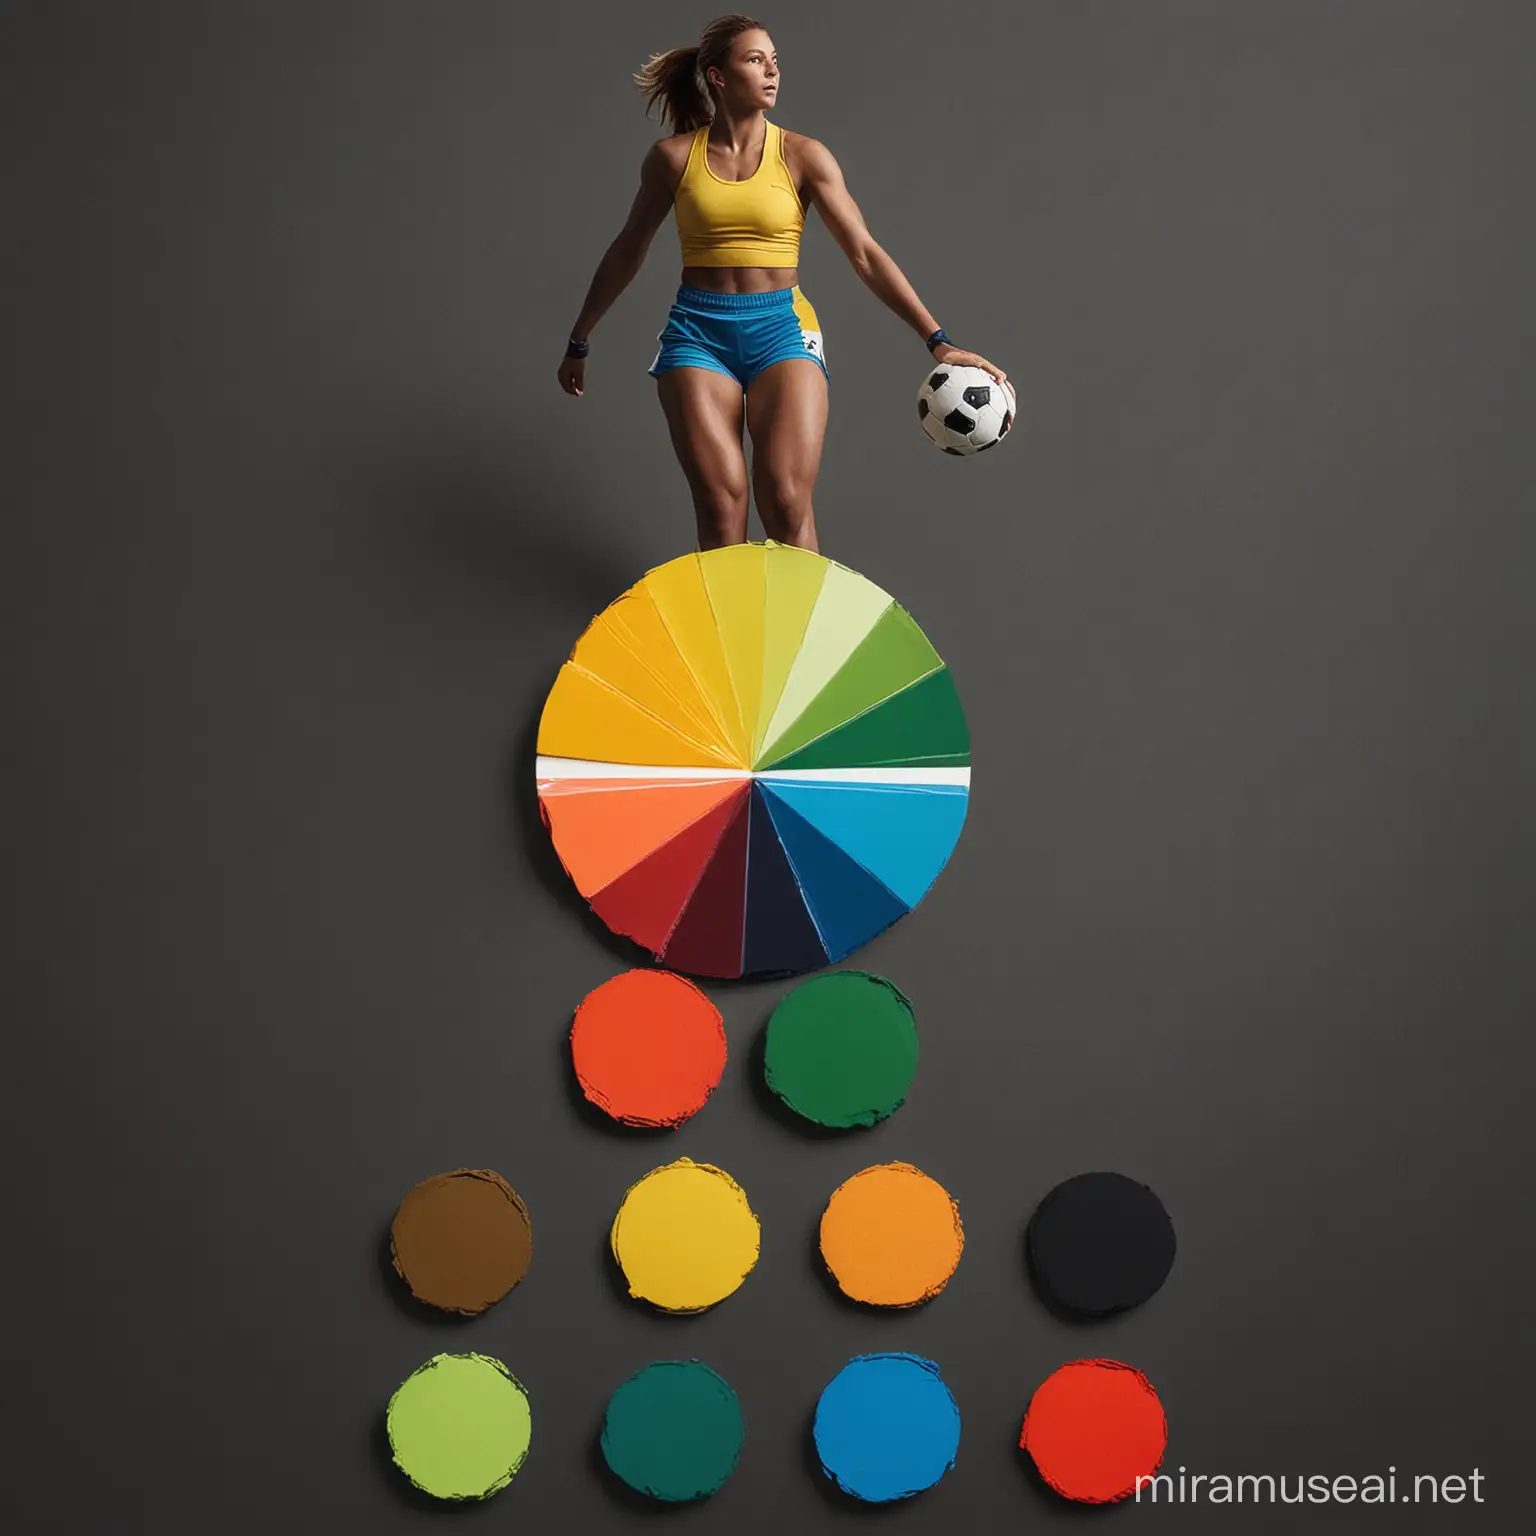 Vibrant Sports Color Palettes Featuring Trending Shades of Red Blue Green Black and Yellow